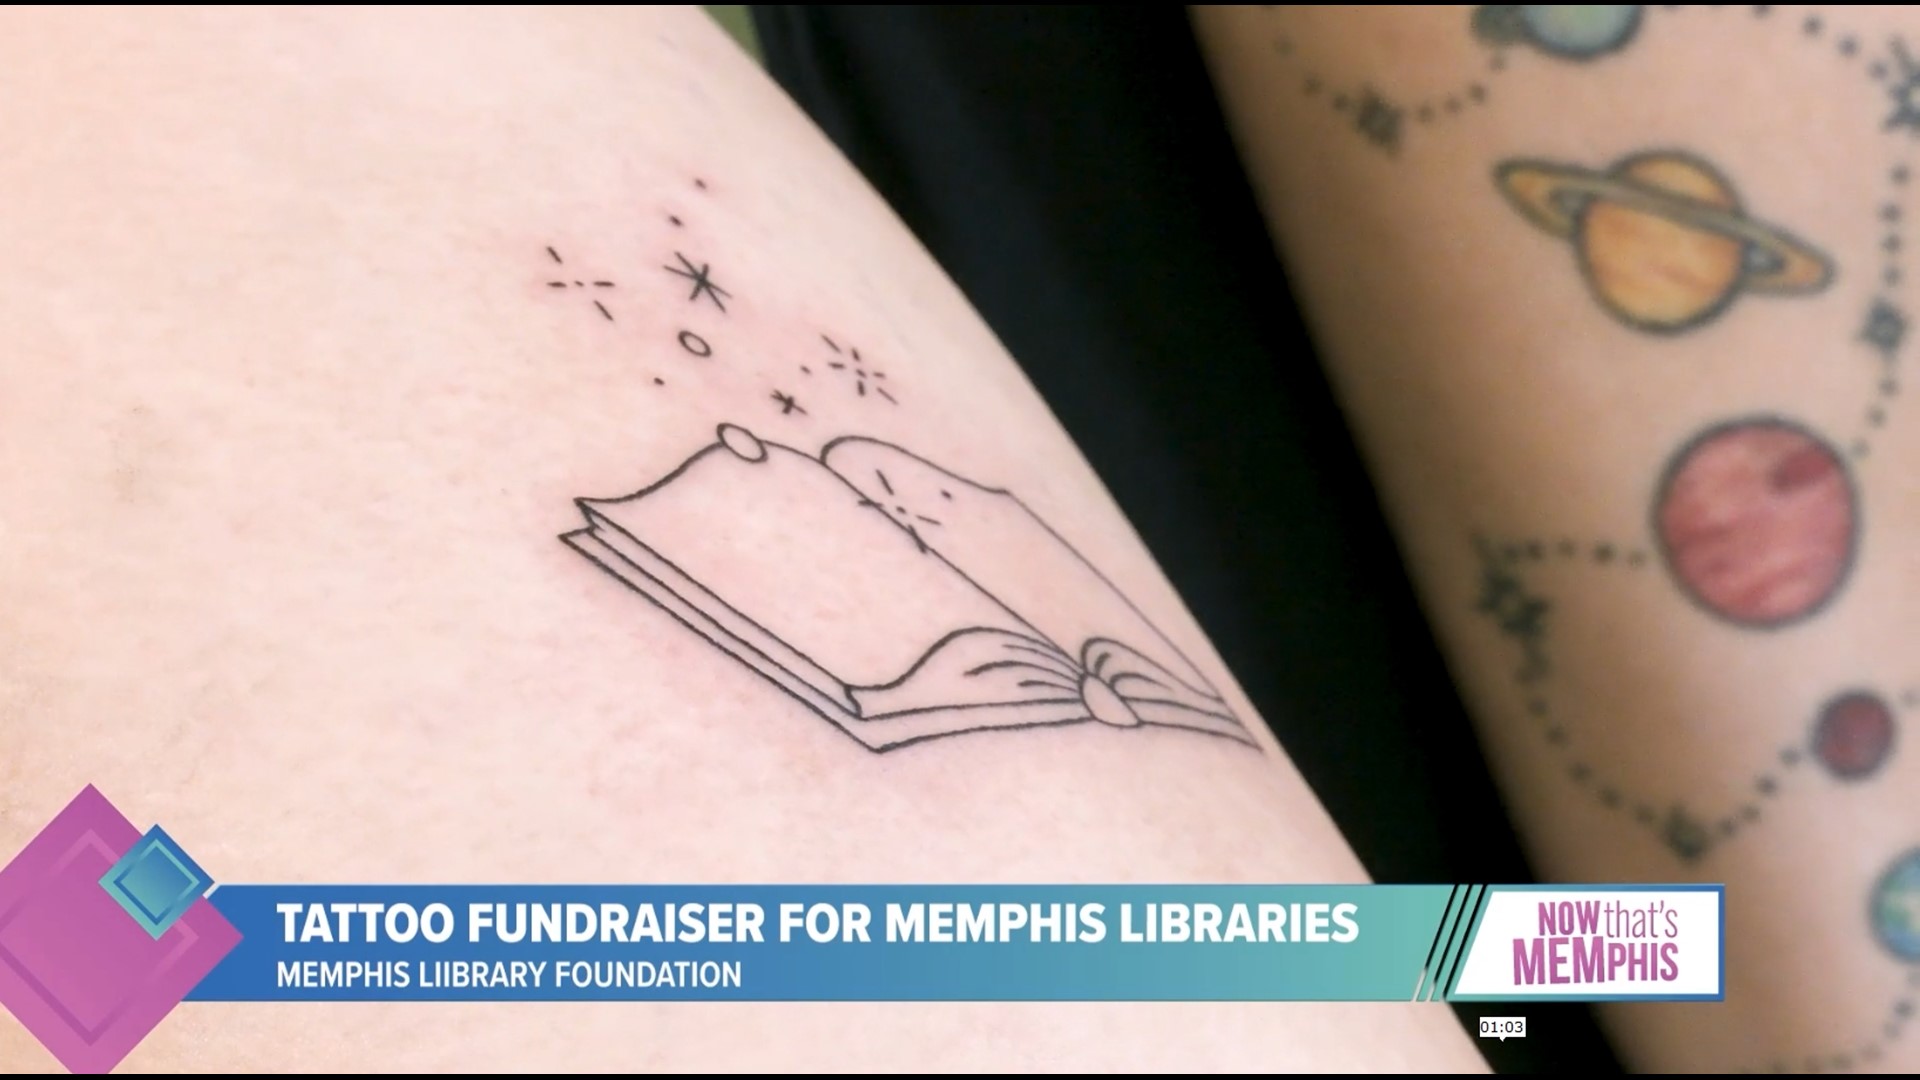 Memphis Library hosted a unique fundraiser where guests chose a literary-themed tattoo and artists volunteered to do them. We believe it'll be an annual tradition.